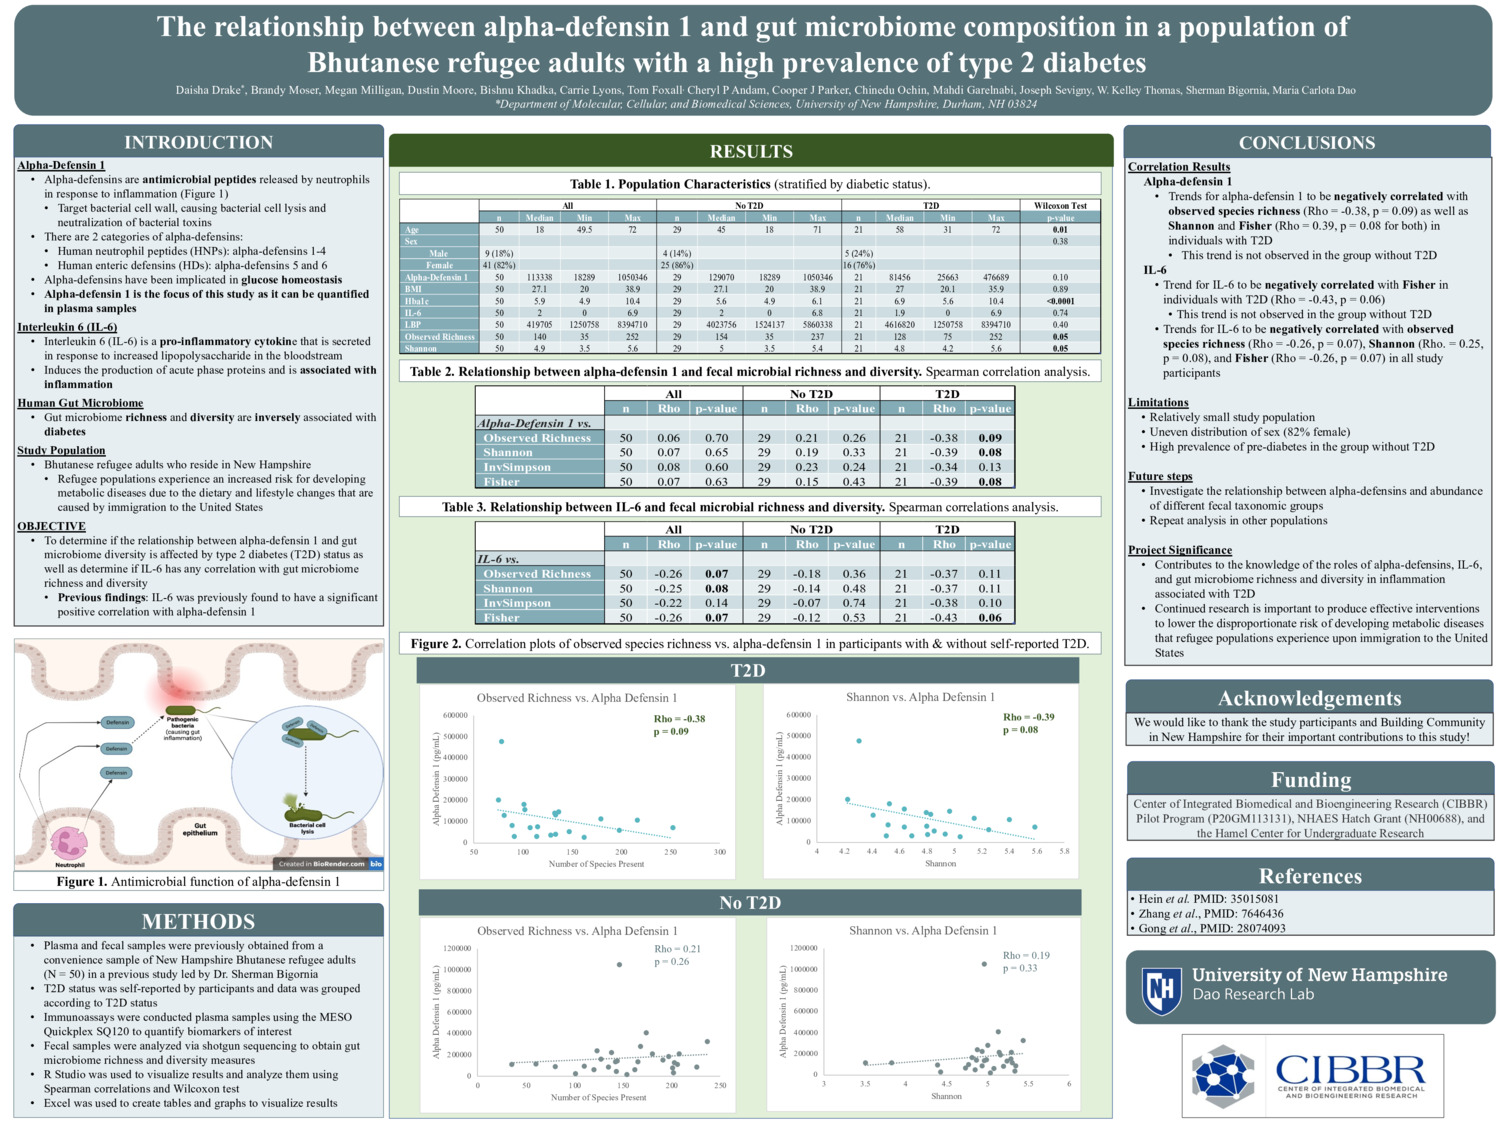 The Relationship Between Alpha-Defensin 1 And Gut Microbiome Composition In A Population Of  								Bhutanese Refugee Adults With A High Prevalence Of Type 2 Diabetes by dad1052